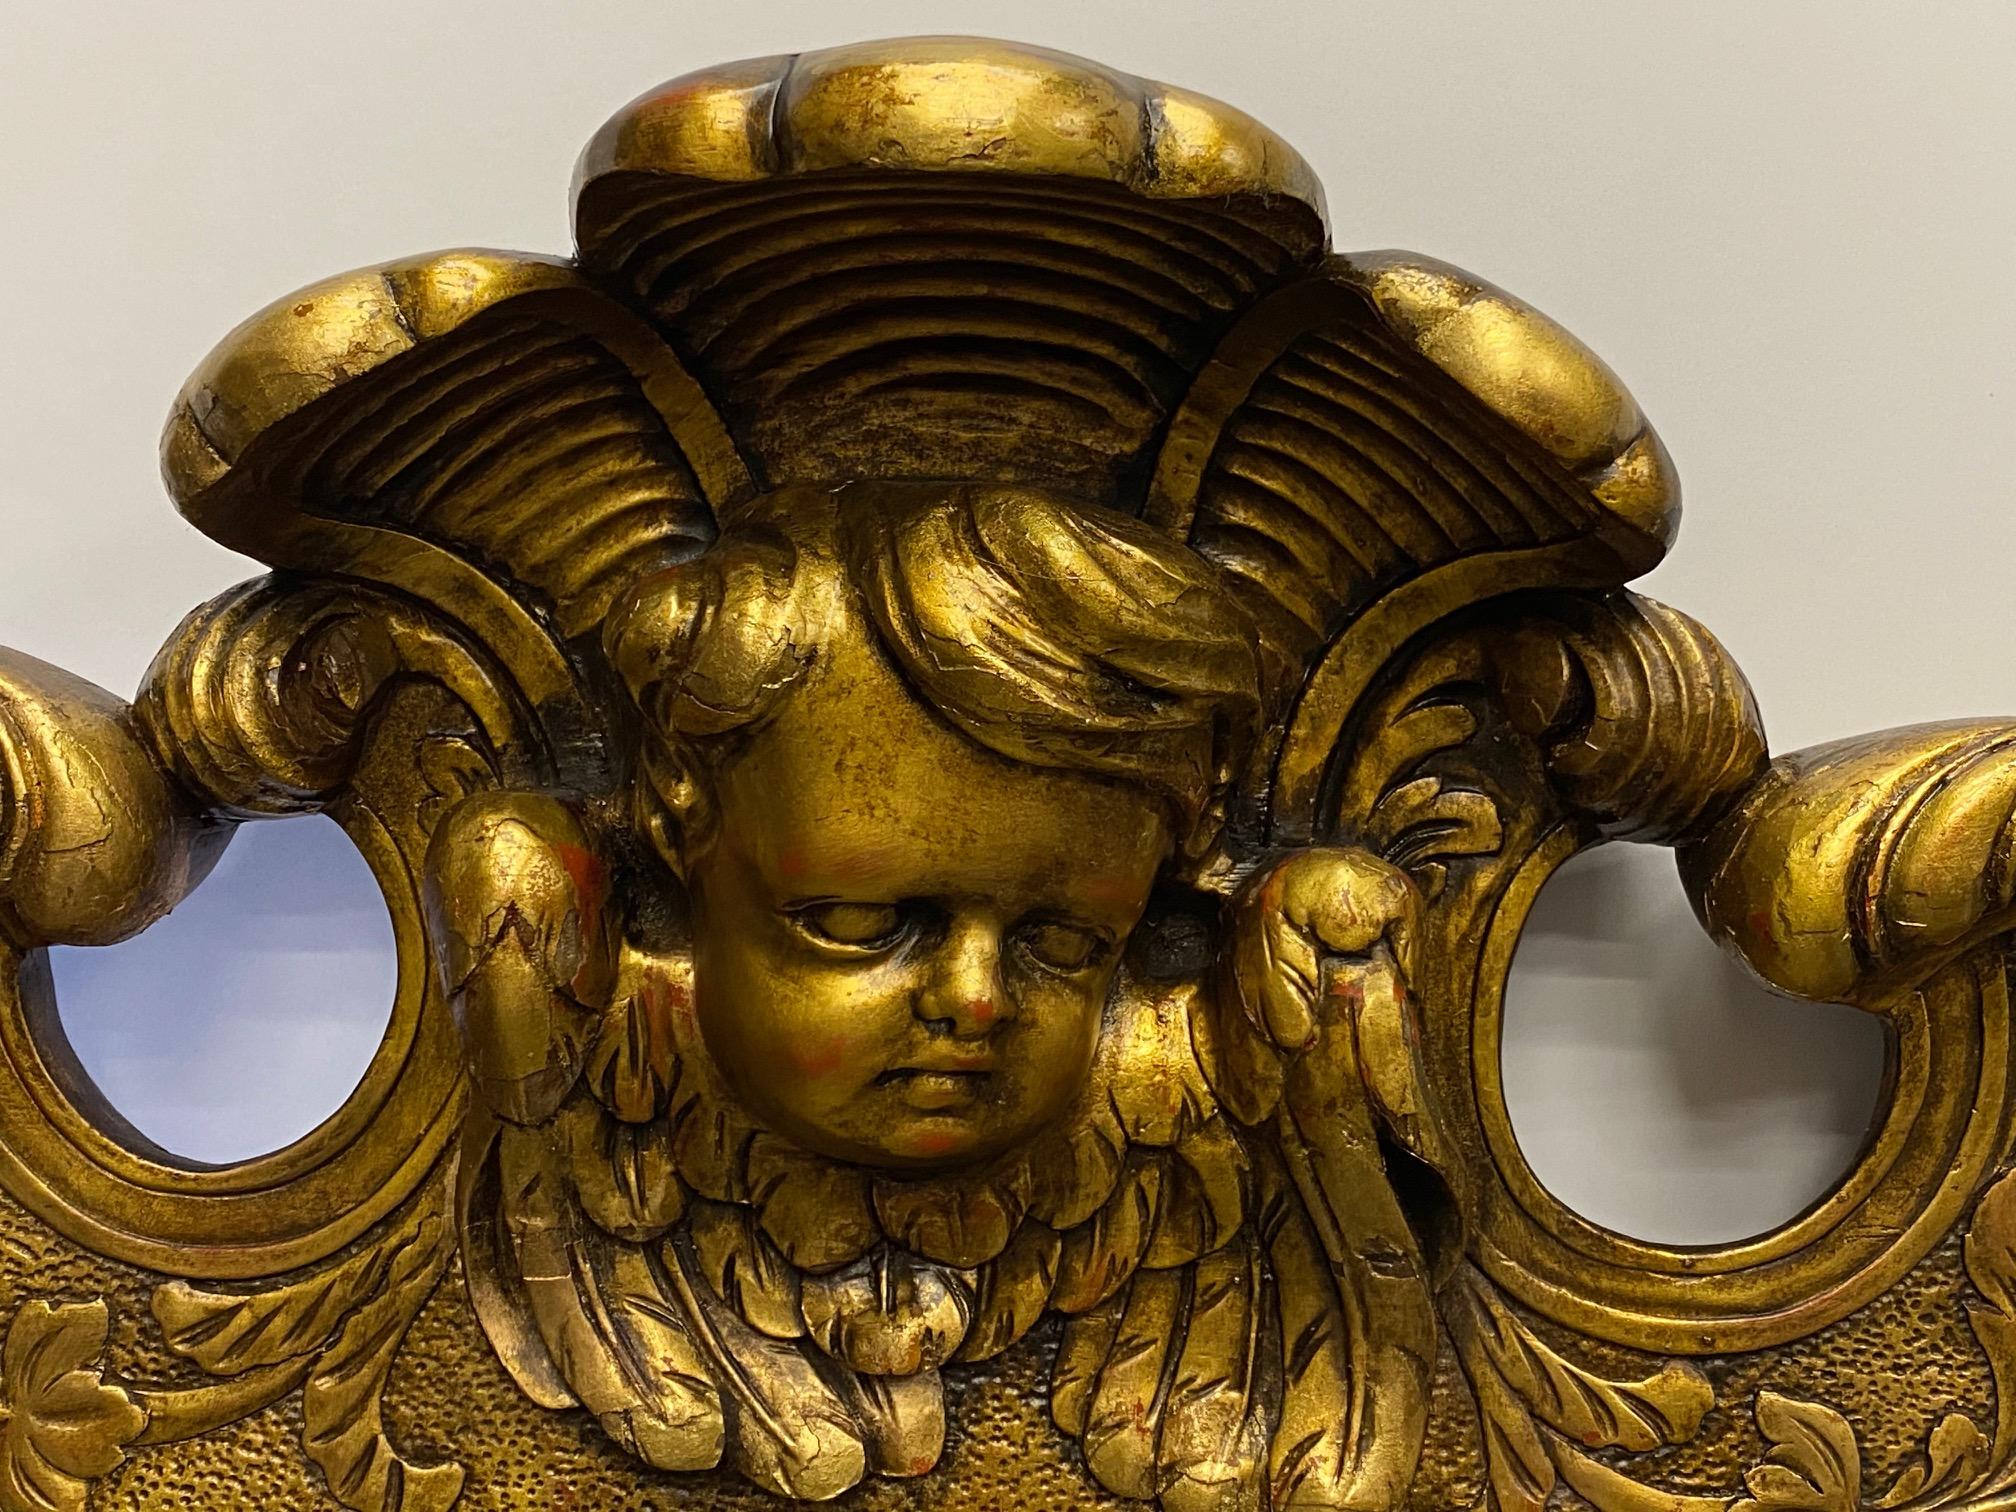 Beautiful vintage carved walnut mirror with Venetian gold finish, wonderful details to carving and face of a cherub at the top.
Depth of body of mirror 1/5